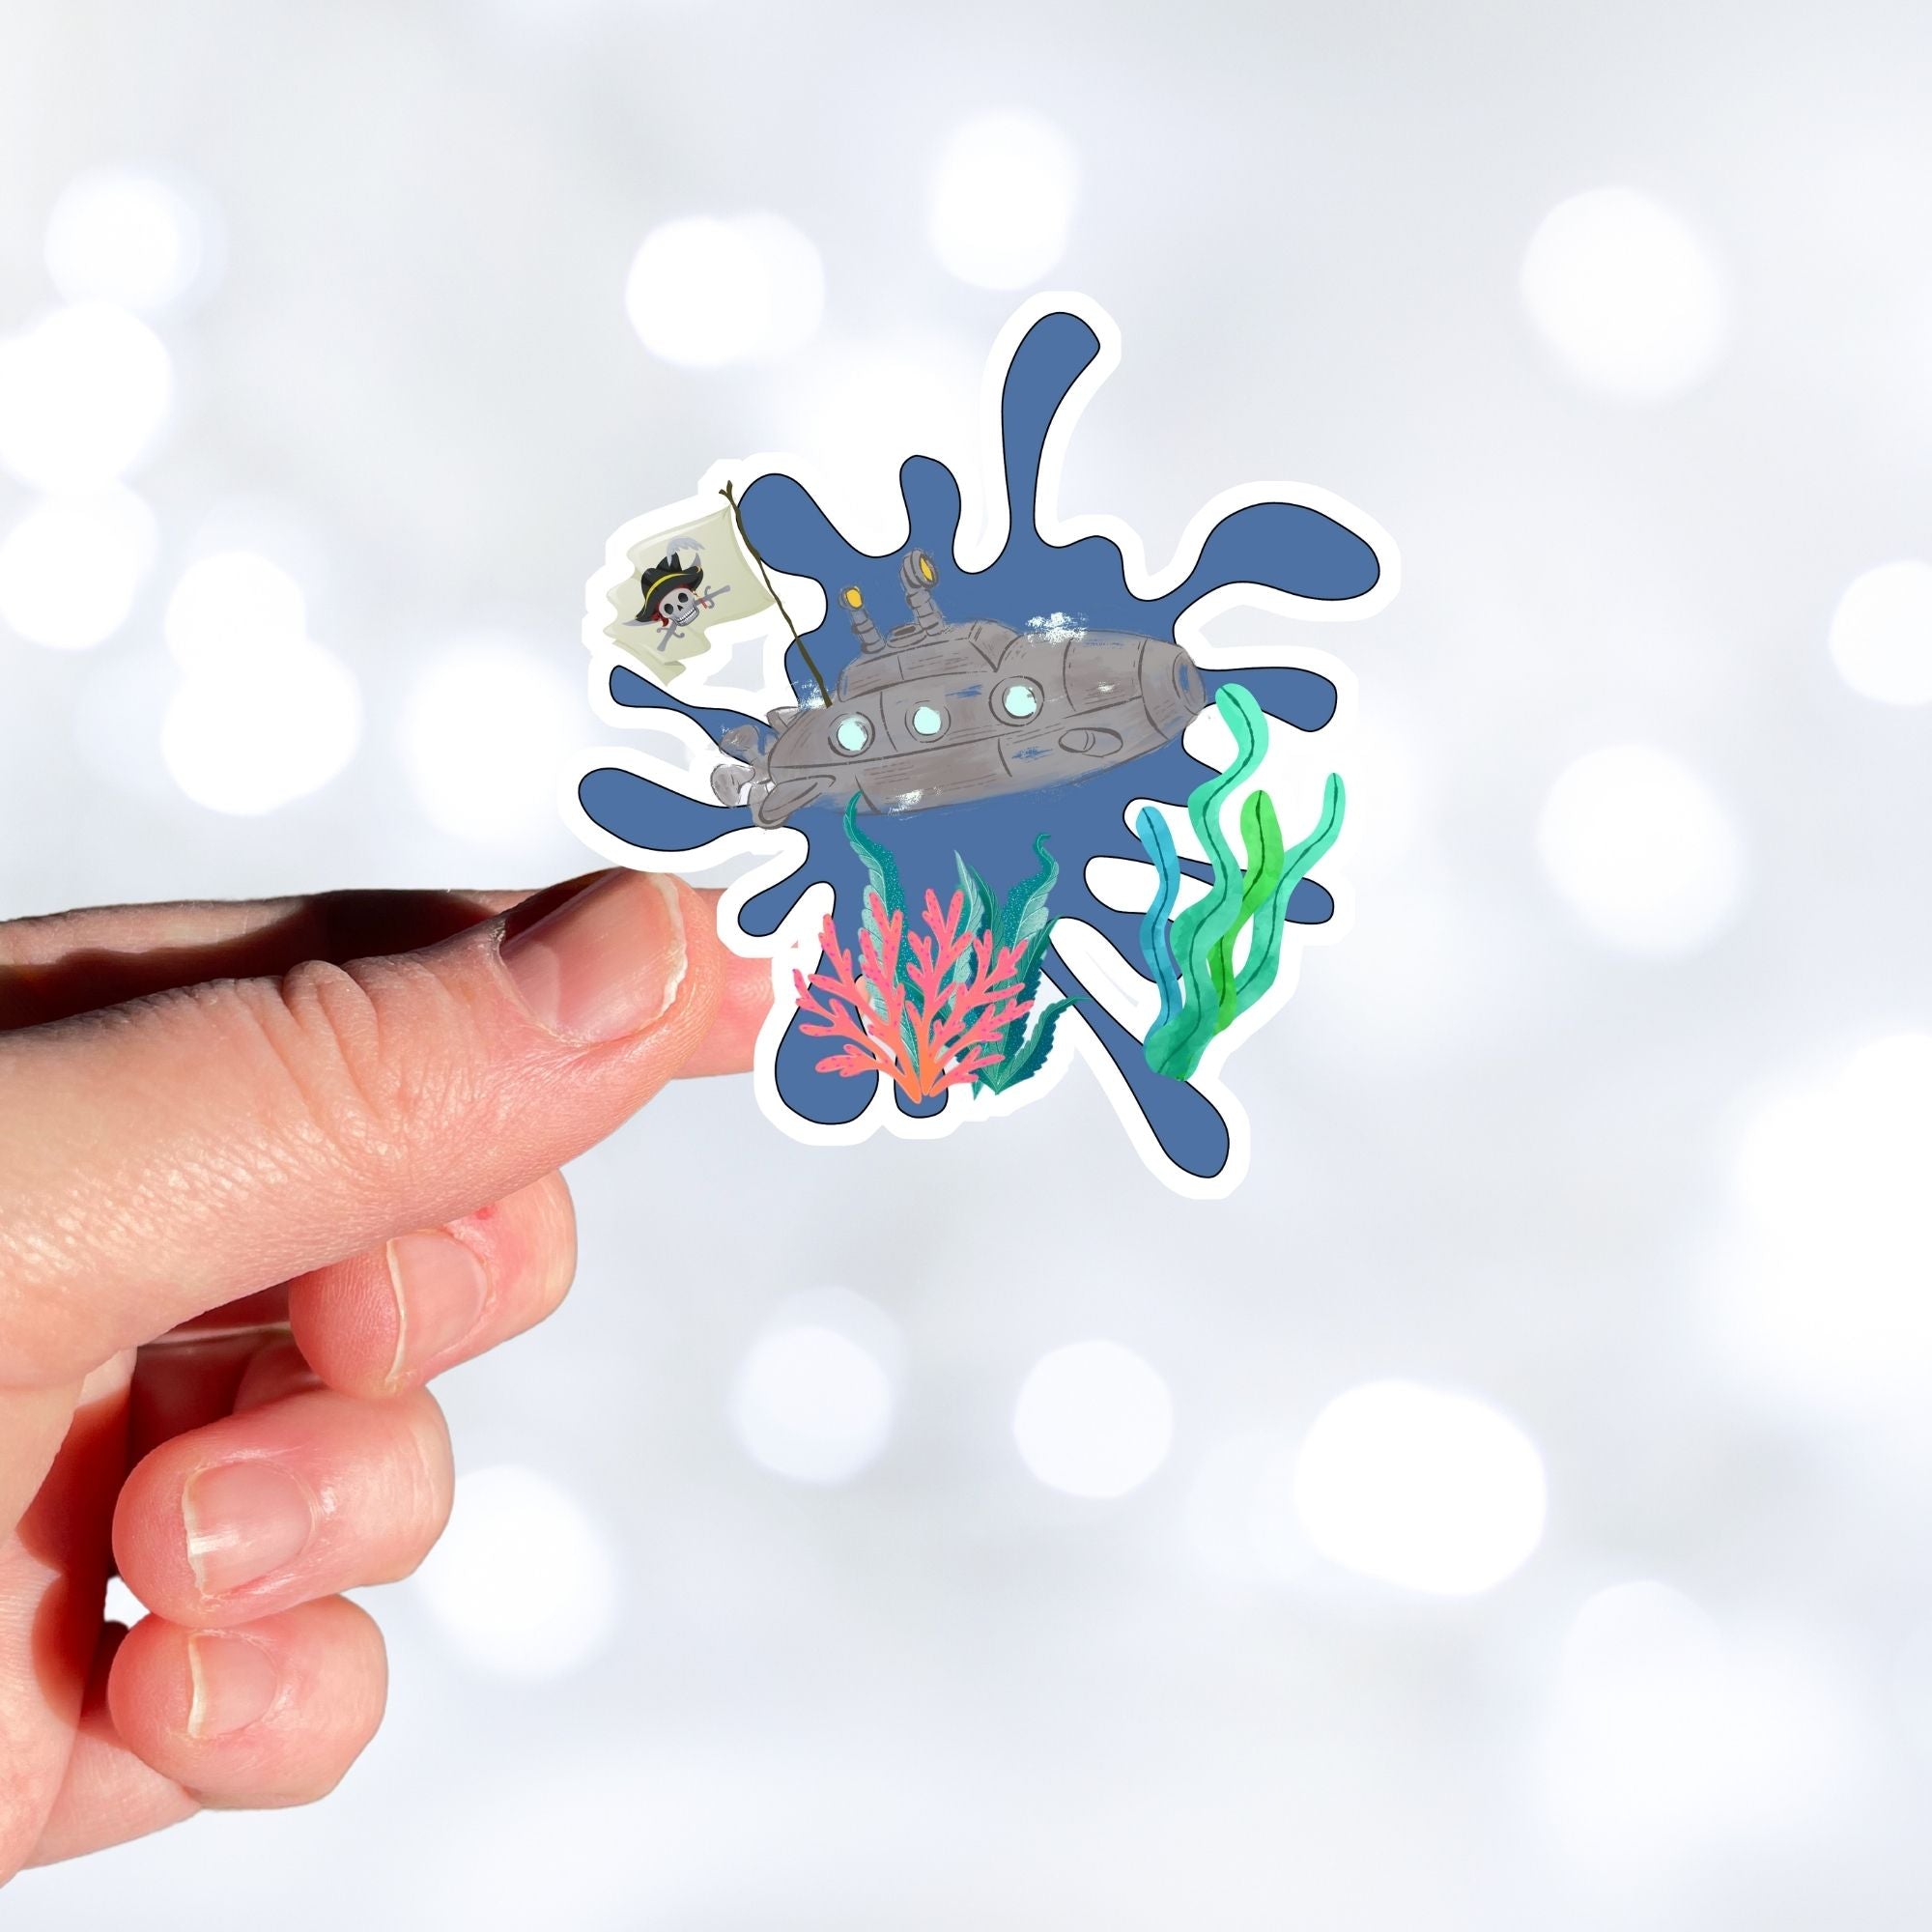 Ahoy Matey! This steampunk submarine sticker has a steampunk and a pirate theme. It features a steampunk submarine with a pirate flag on a blue background with coral and underwater plants. This image shows a hand holding the steampunk submarine sticker.